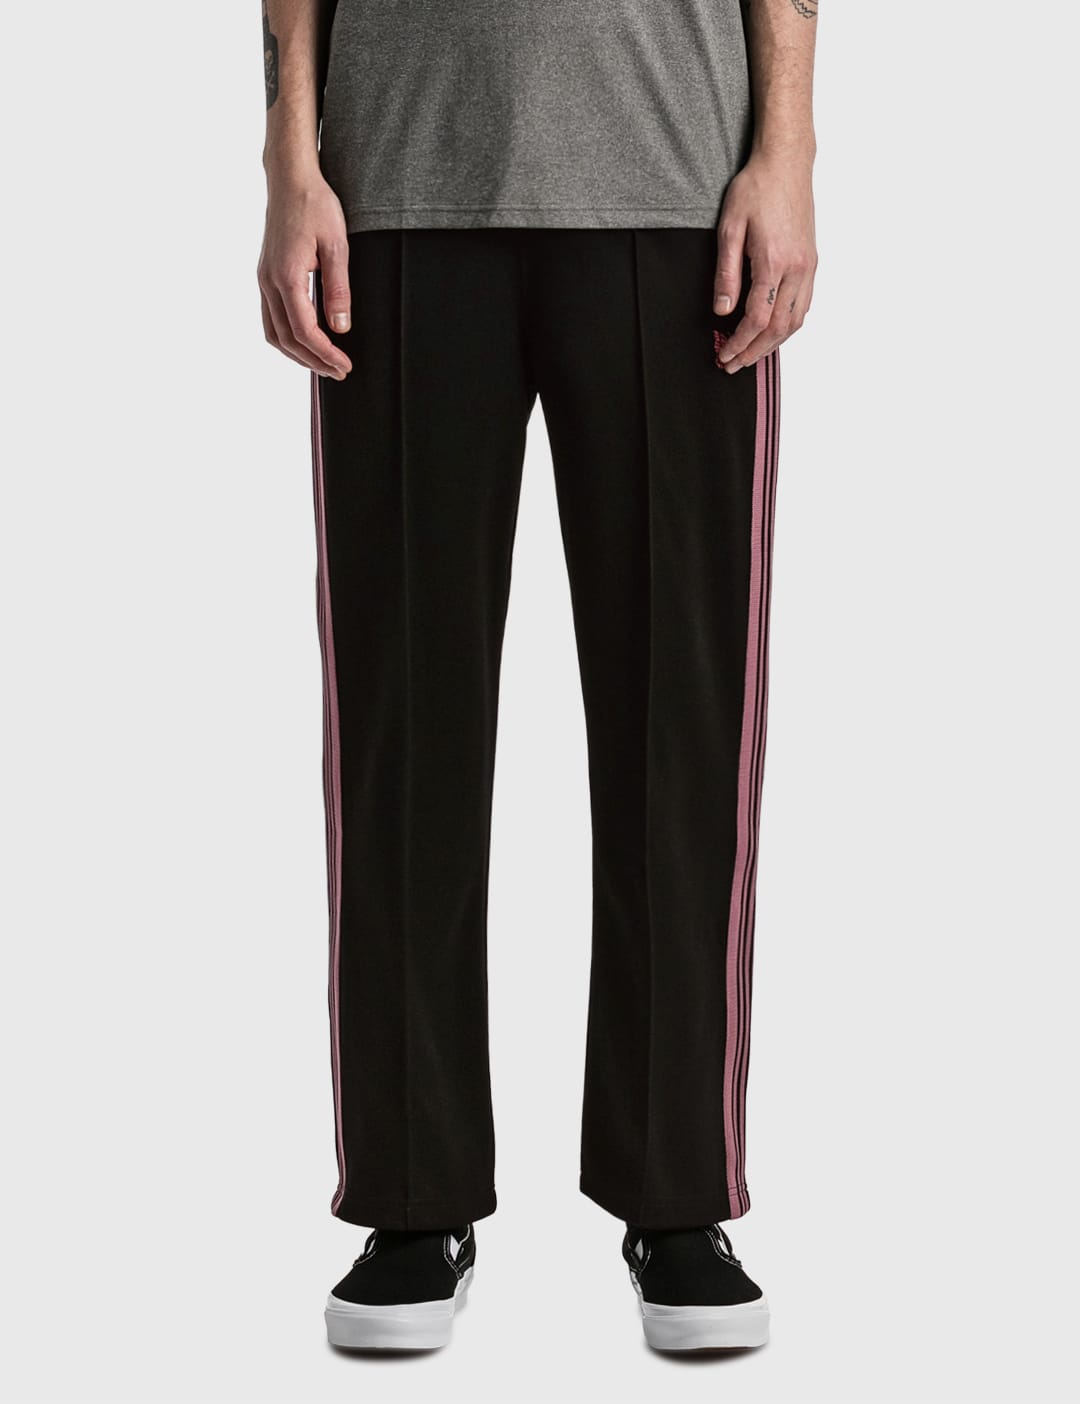 Needles - Poly Smooth Track Pants | HBX - Globally Curated Fashion 